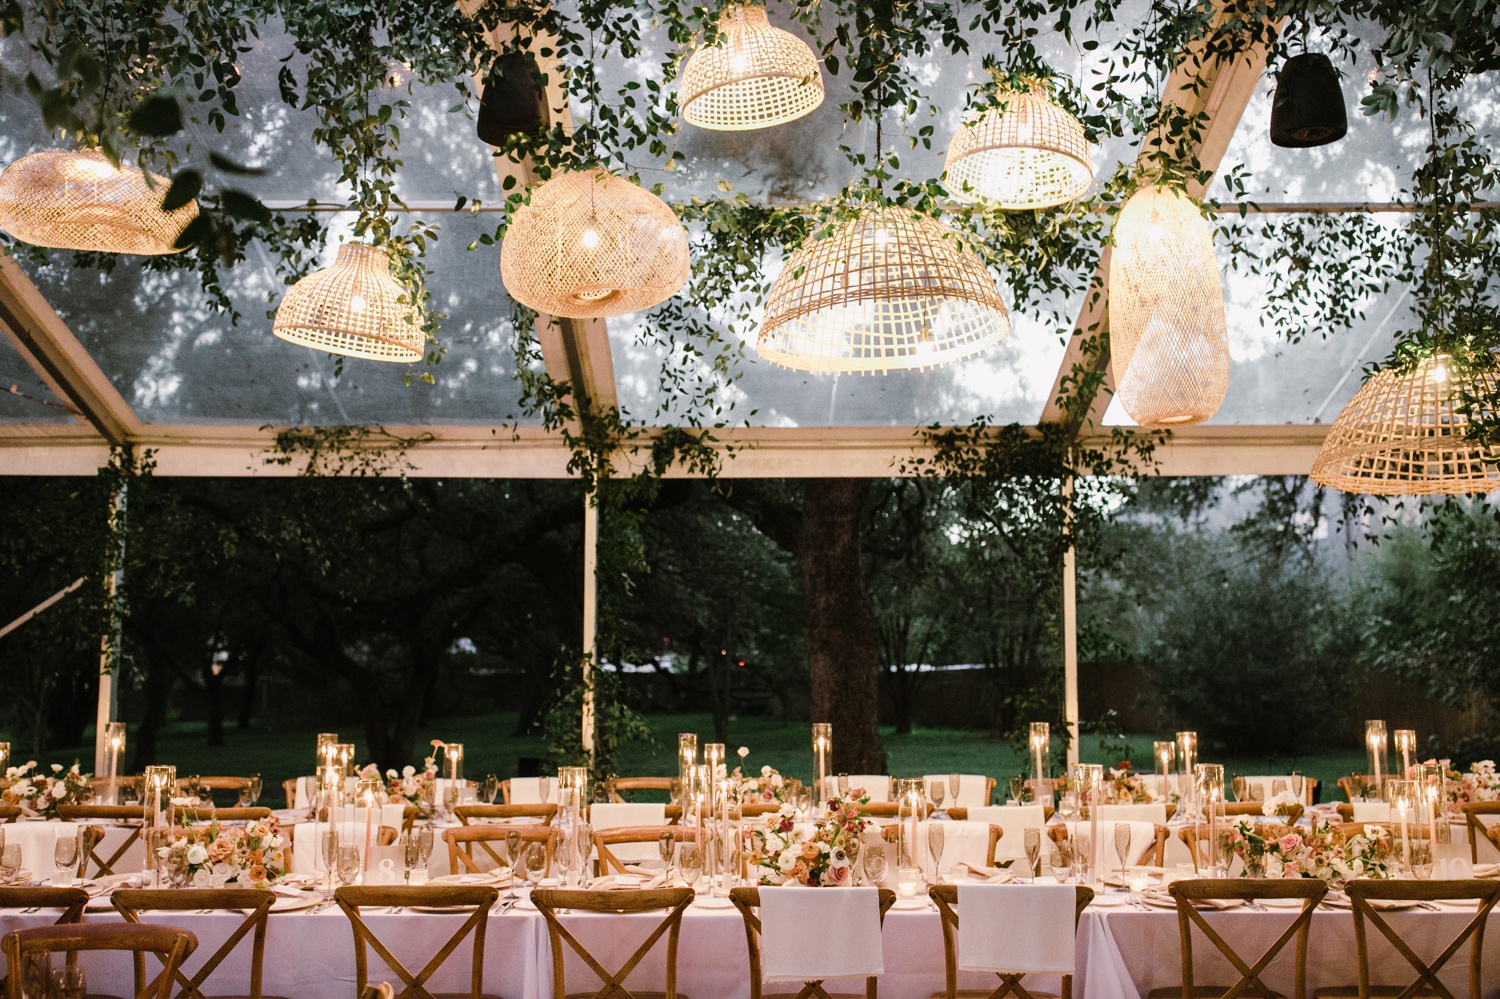 Rattan lanterns, white tablecloths, and peach flowers for an evening dinner reception